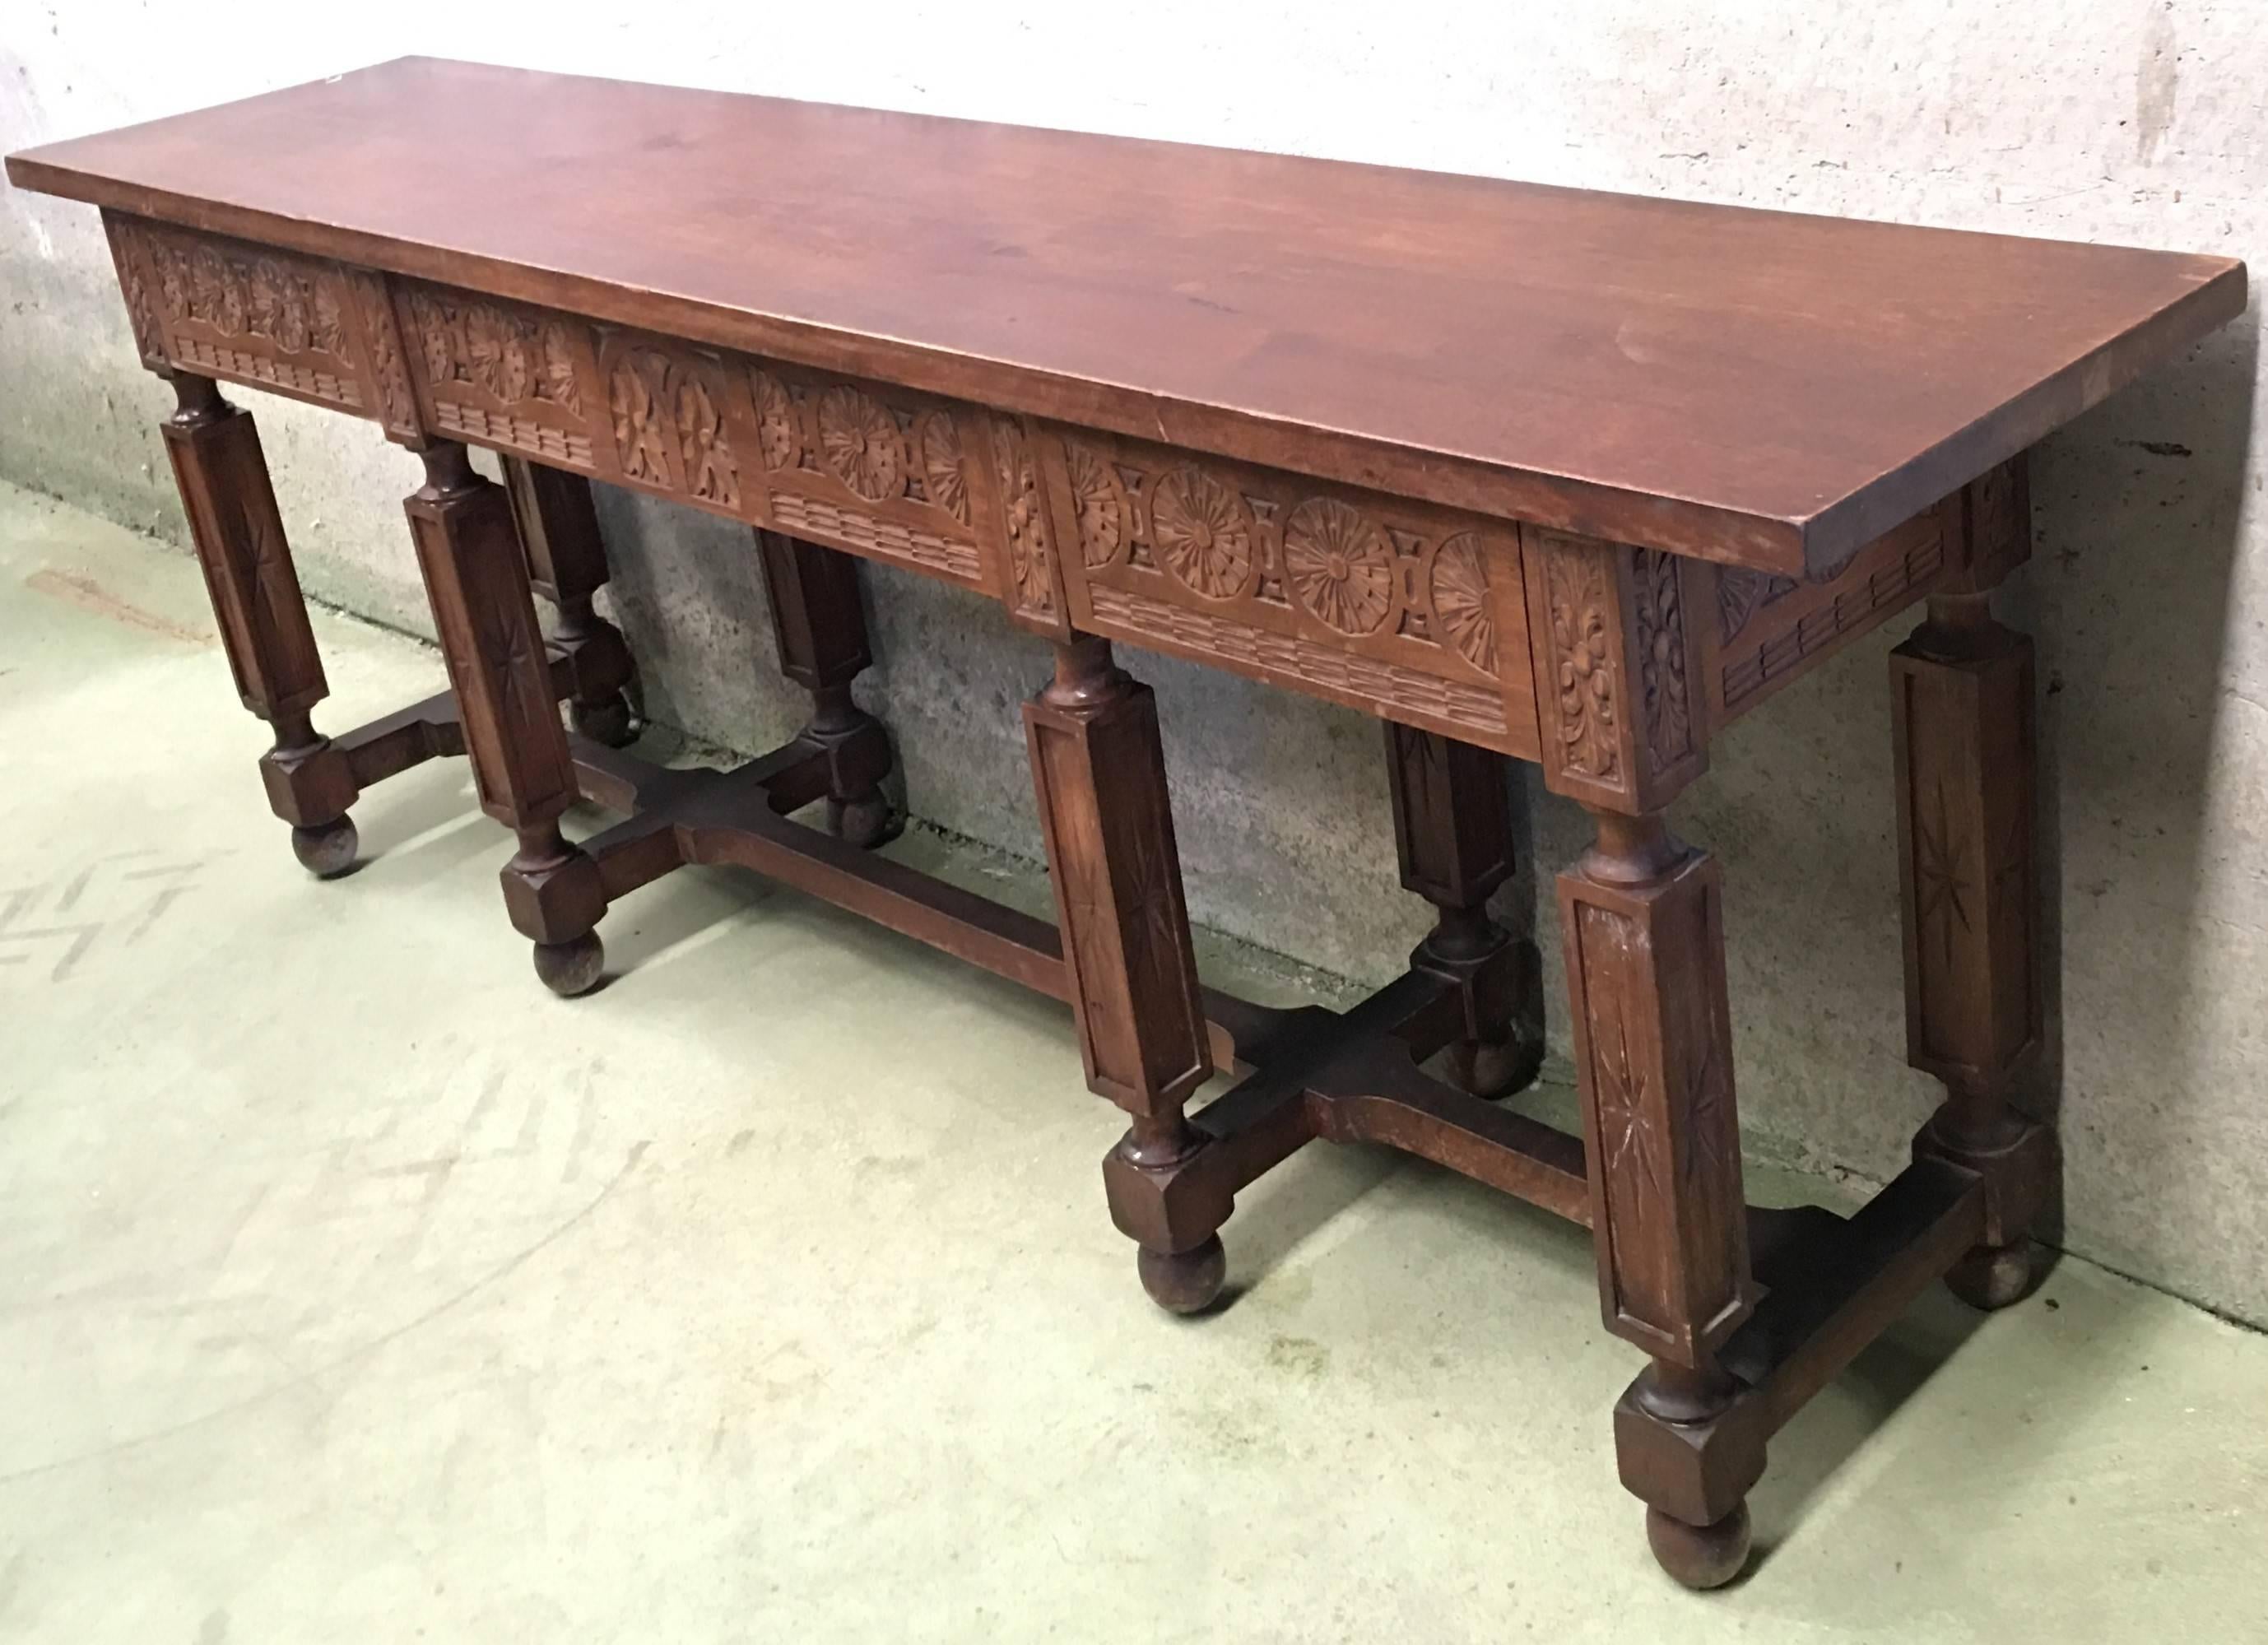 19th century Spanish carved walnut bench or low table with two drawers.